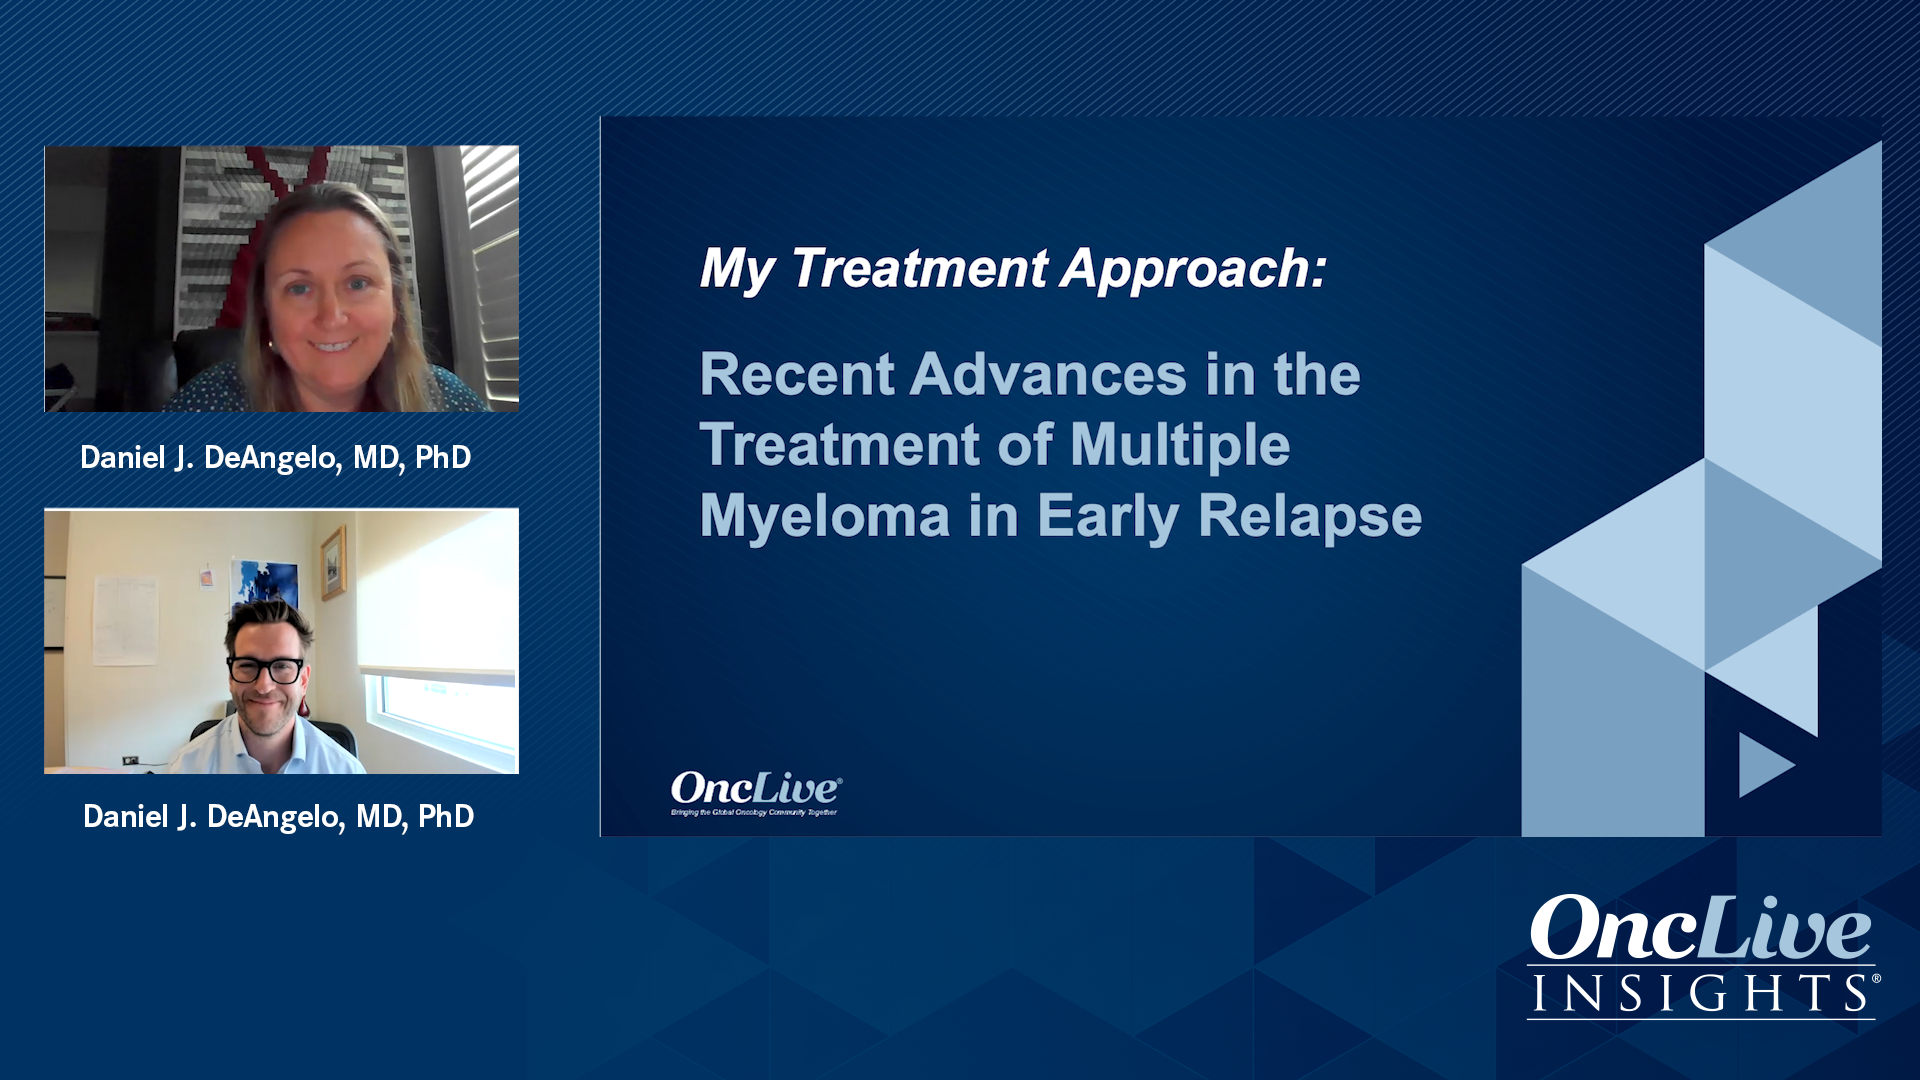 Patient Profile 1: A 63-Year-Old Female with Relapsed Multiple Myeloma